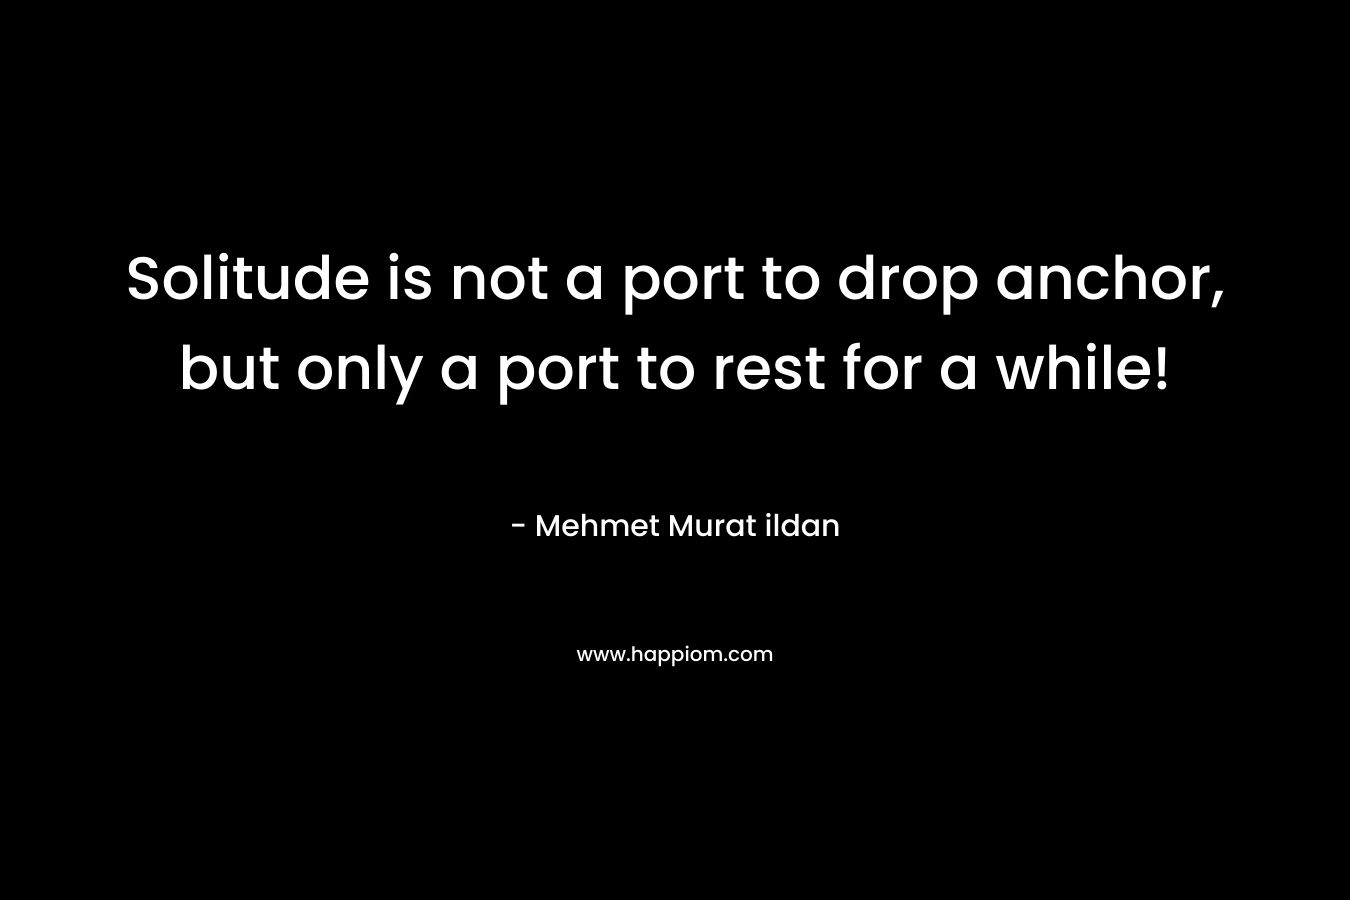 Solitude is not a port to drop anchor, but only a port to rest for a while!